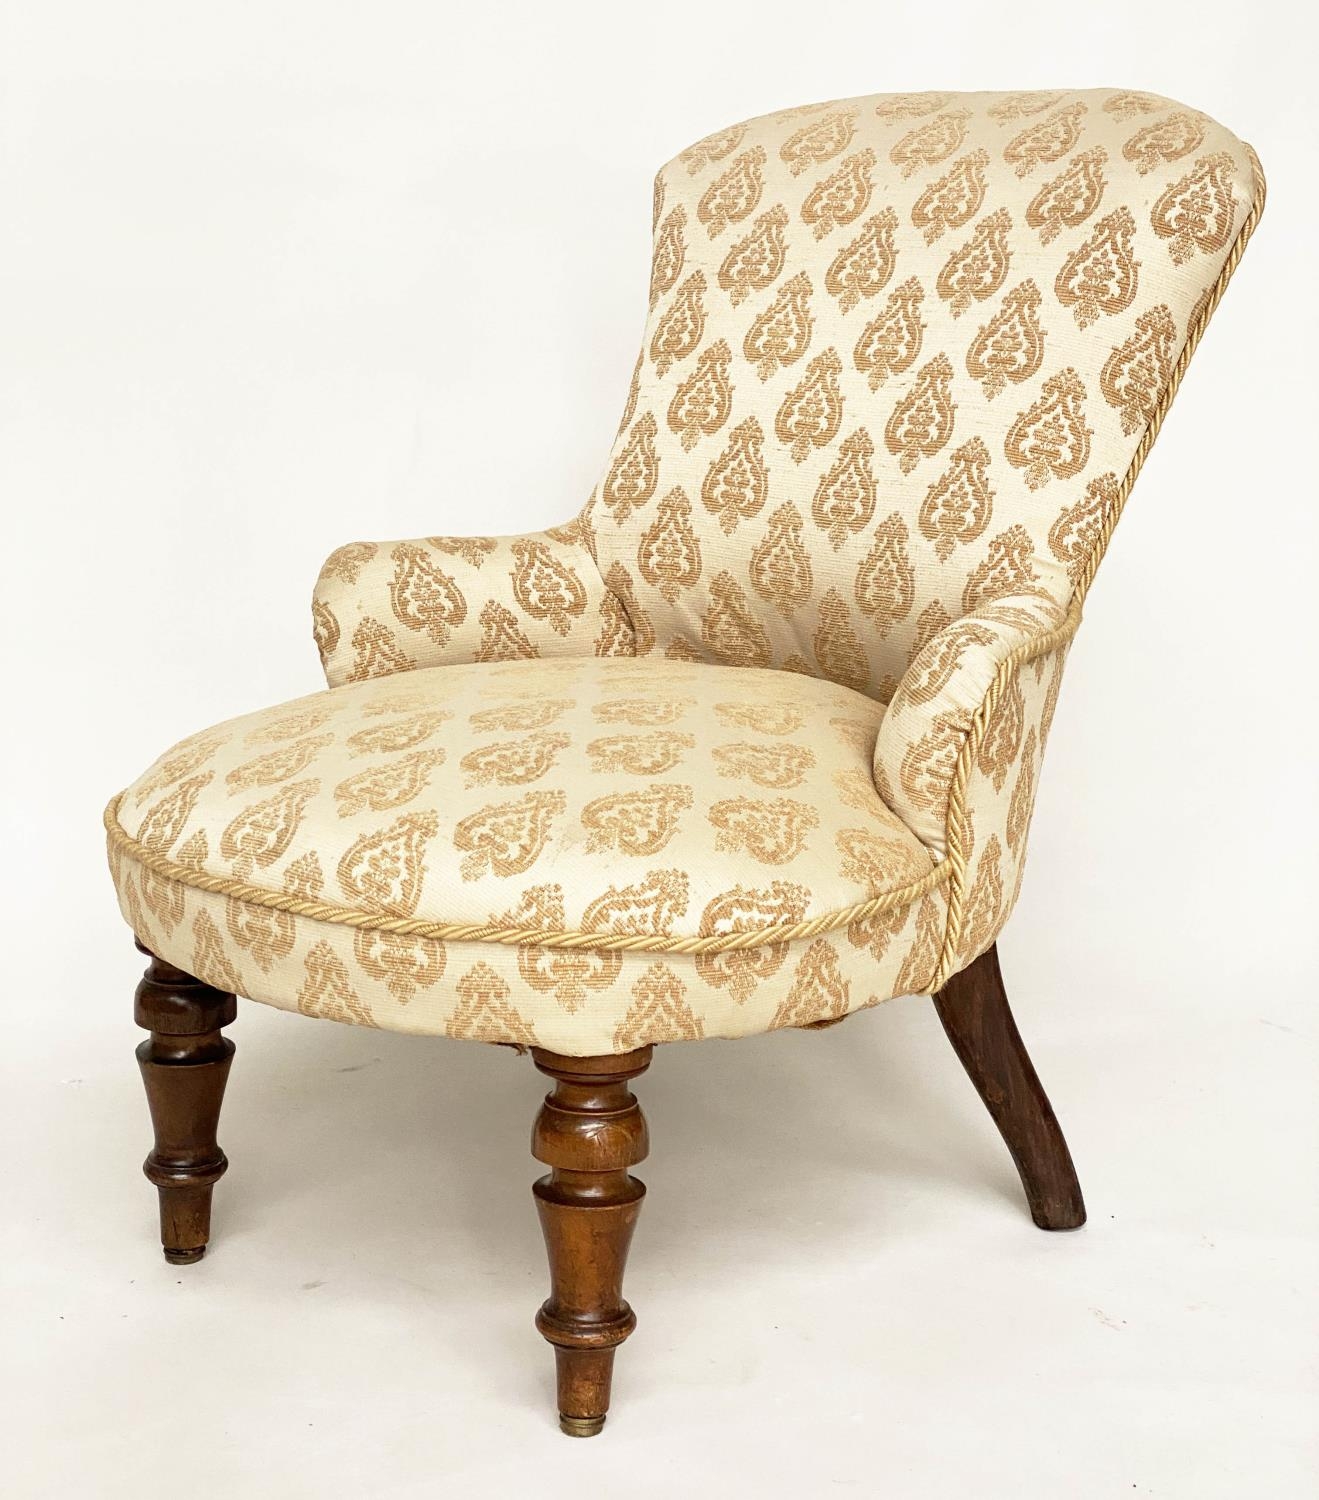 SLIPPER ARMCHAIR, Victorian walnut with two tone woven leaf upholstery and turned front supports,